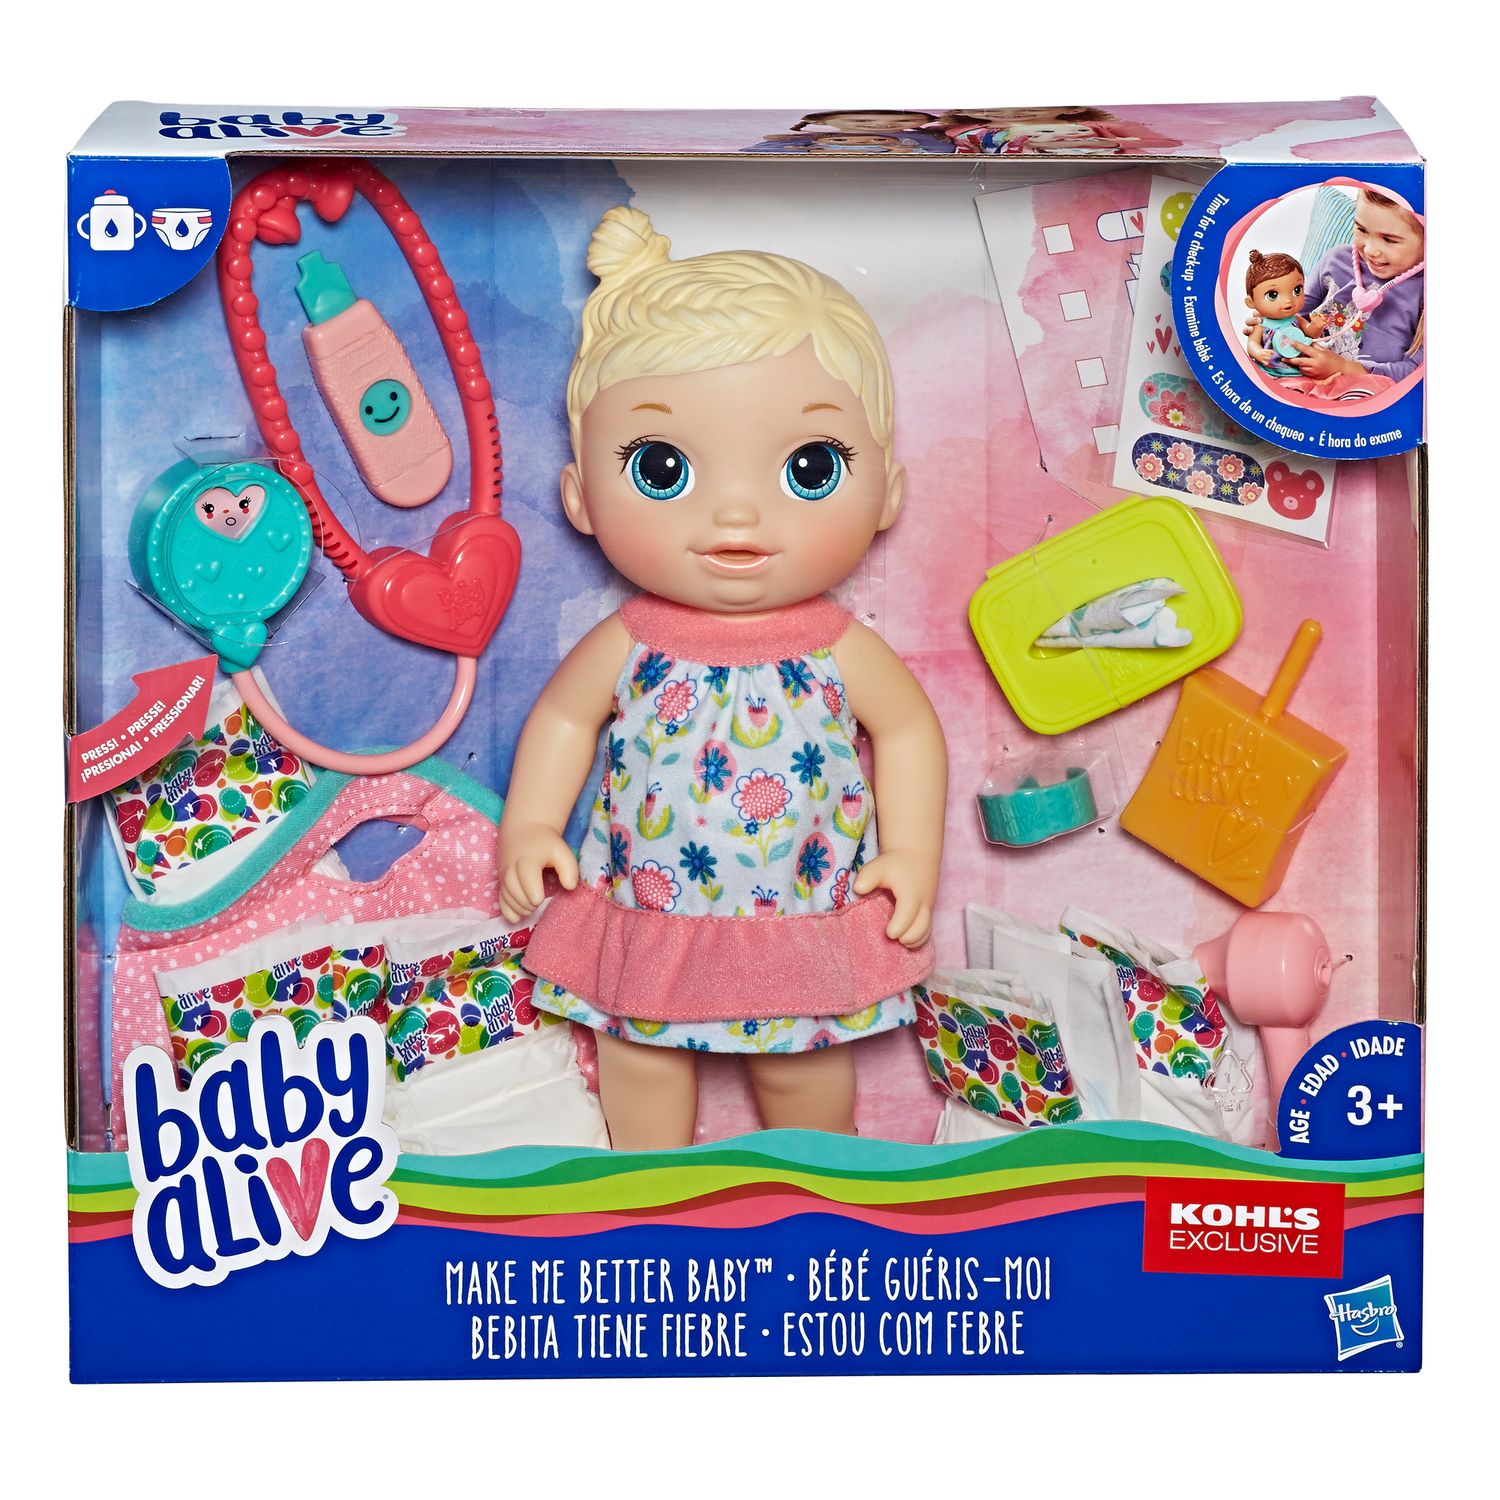 baby alive doll cost